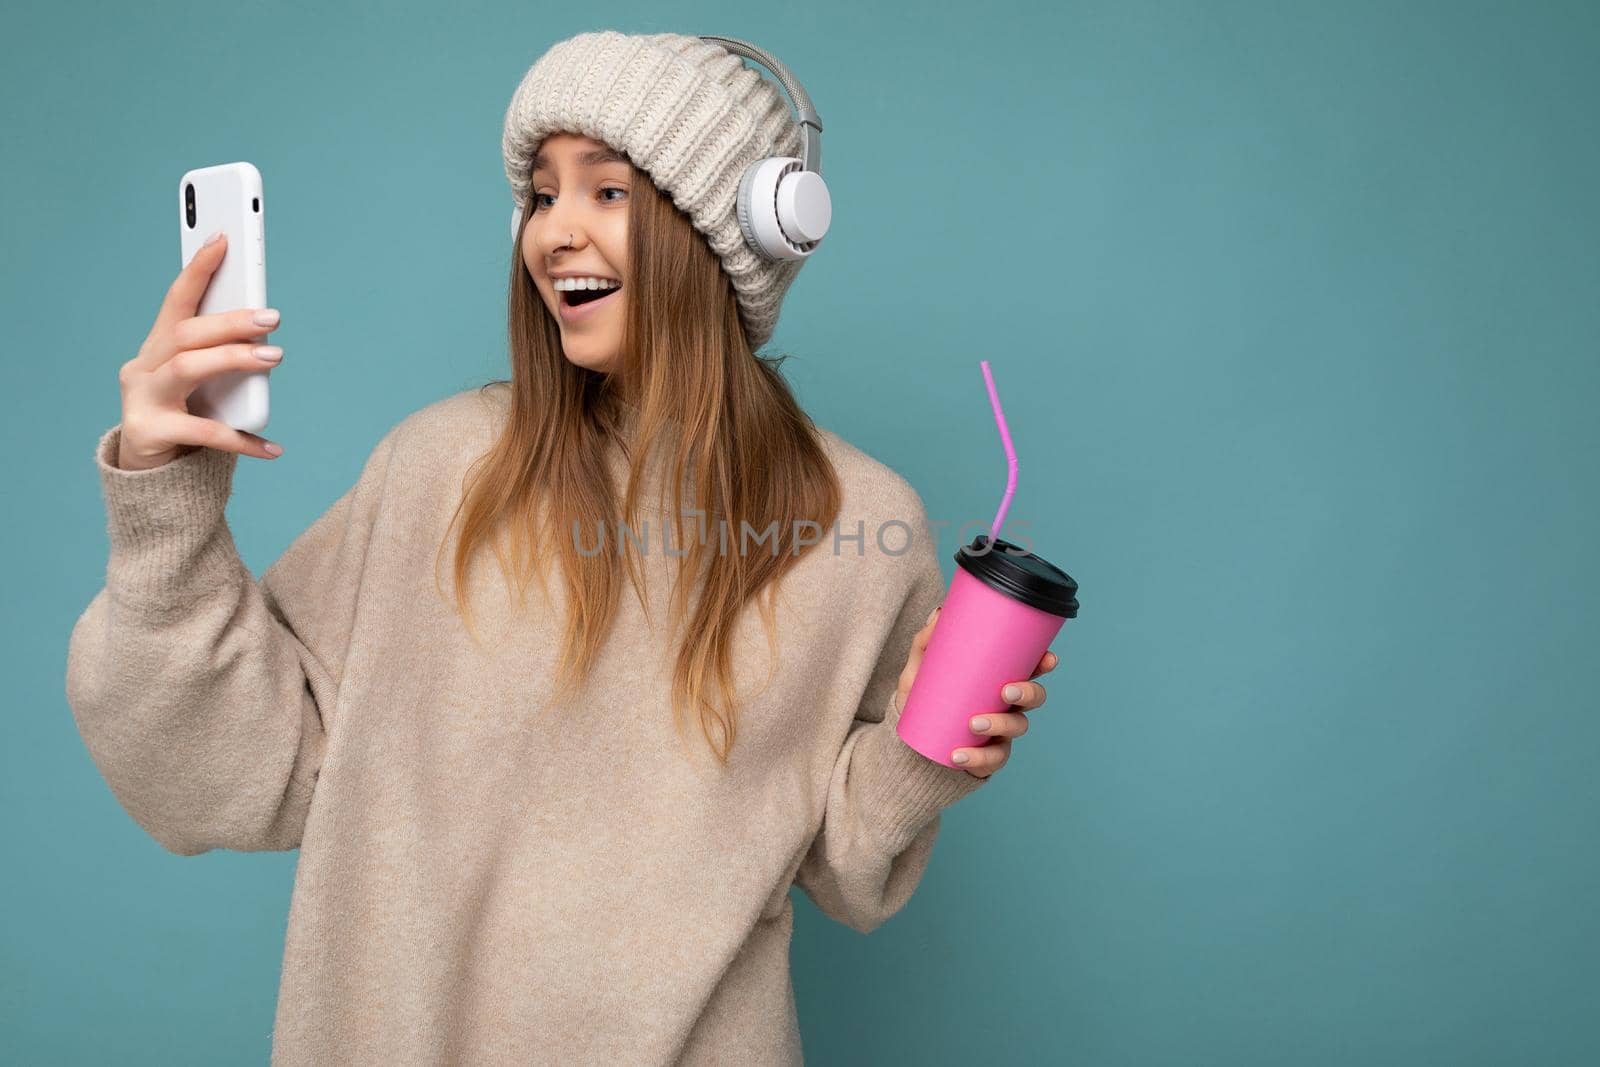 Attractive overjoyed delightful young blonde woman wearing beige sweater and beige hat white headphones isolated over blue background holding in hand and using mobile phone drinking beverage and listening to music looking at gadjet display. copy spcae